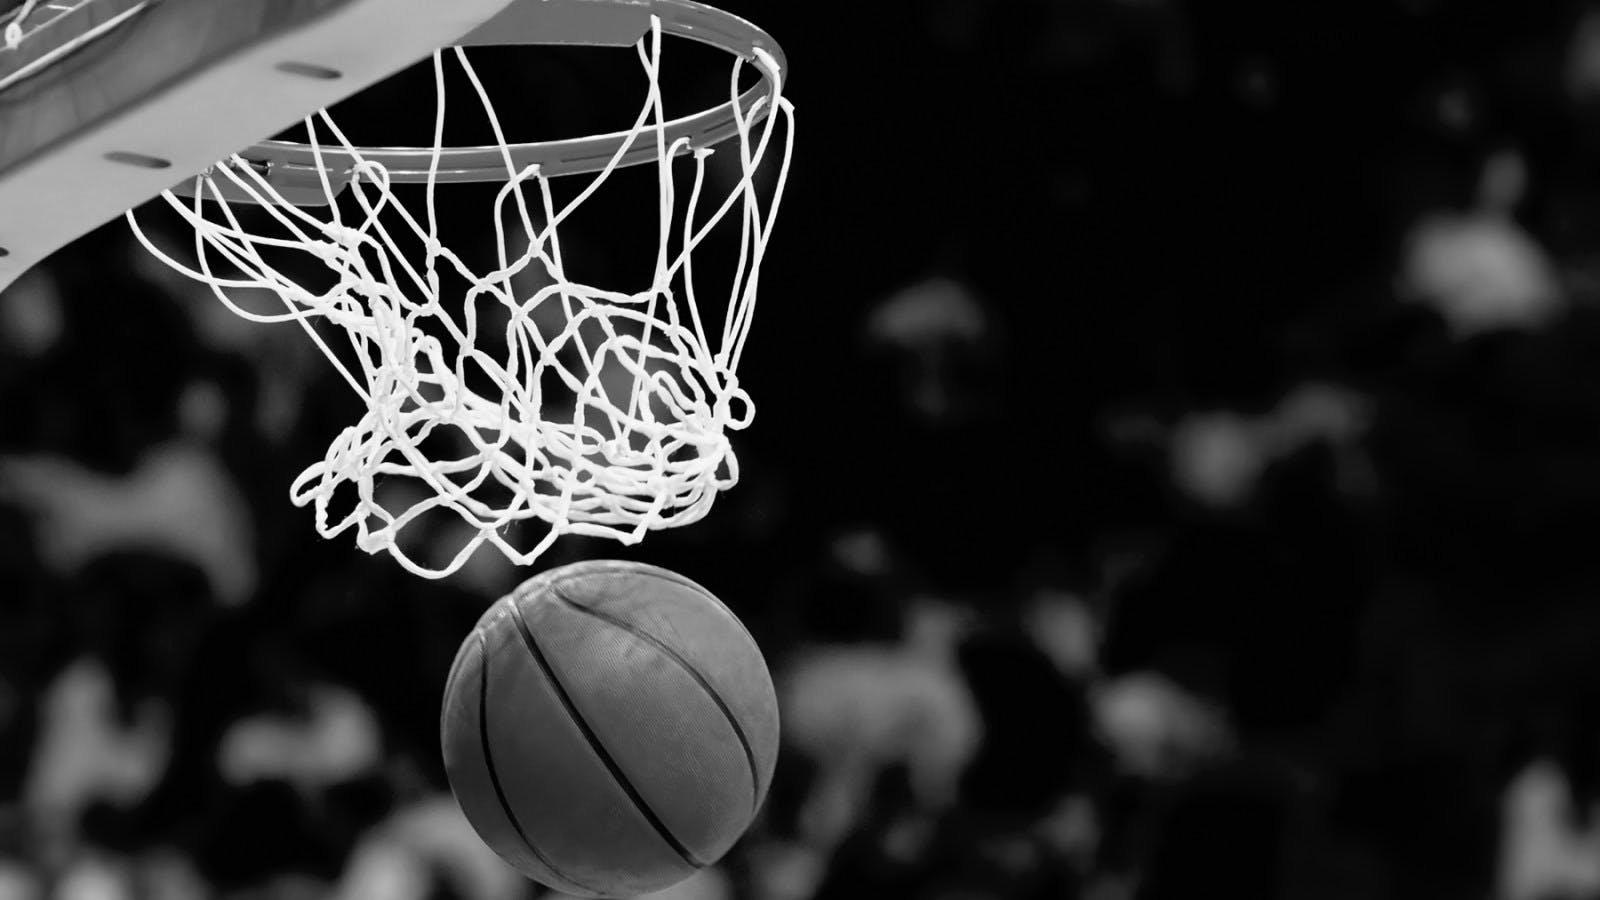 Applying Cannabis Research to College Basketball